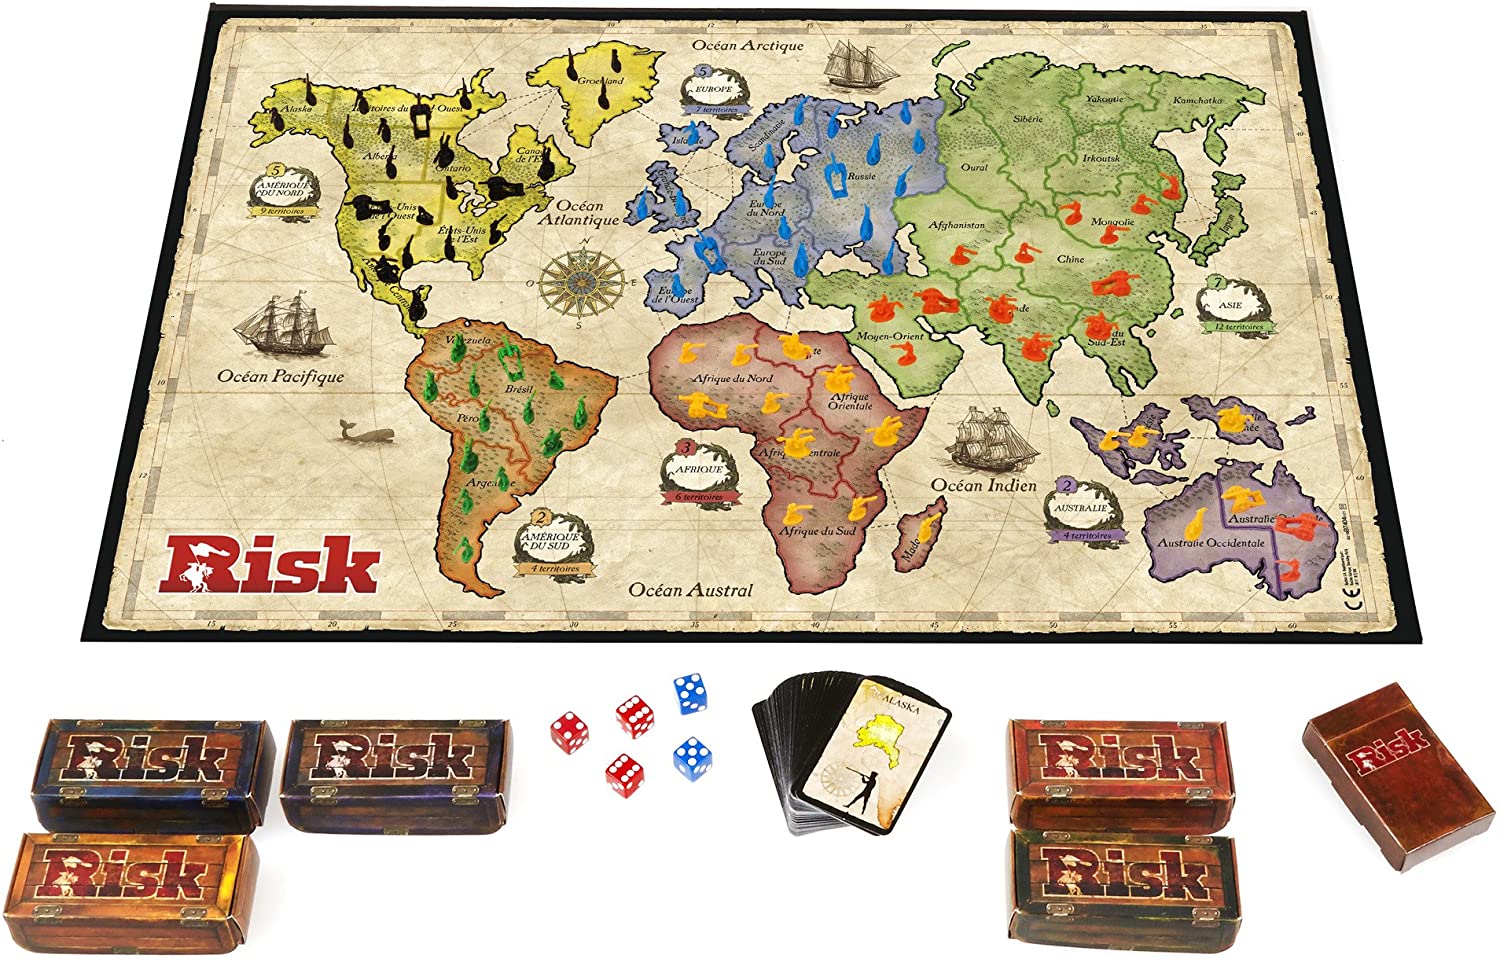 How to play Risk